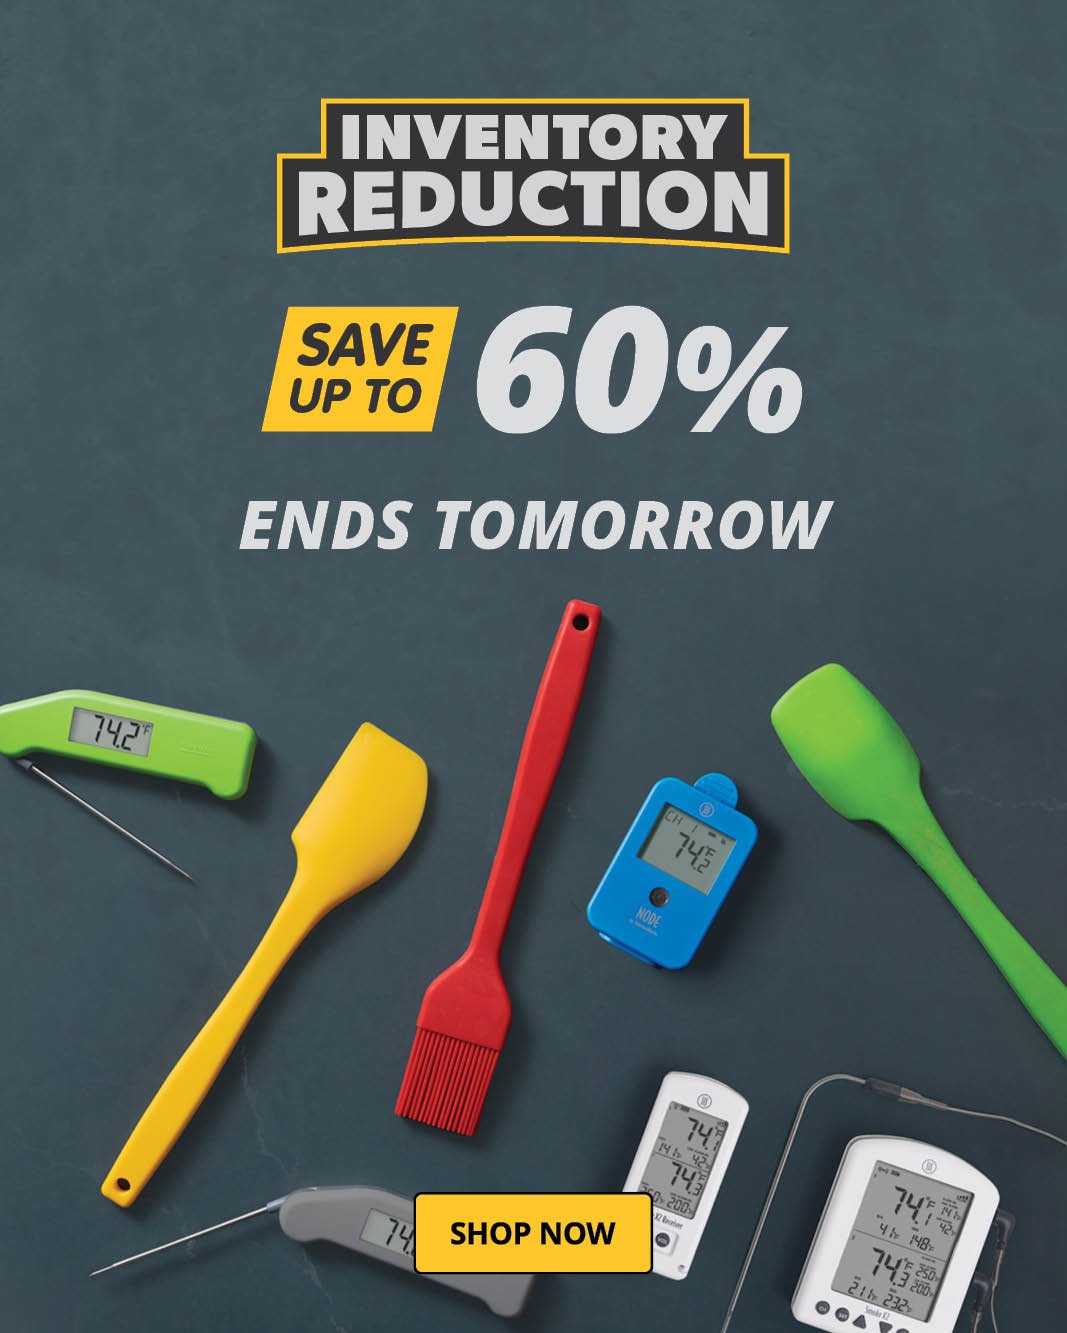 Inventory Reduction Ends Tomorrow